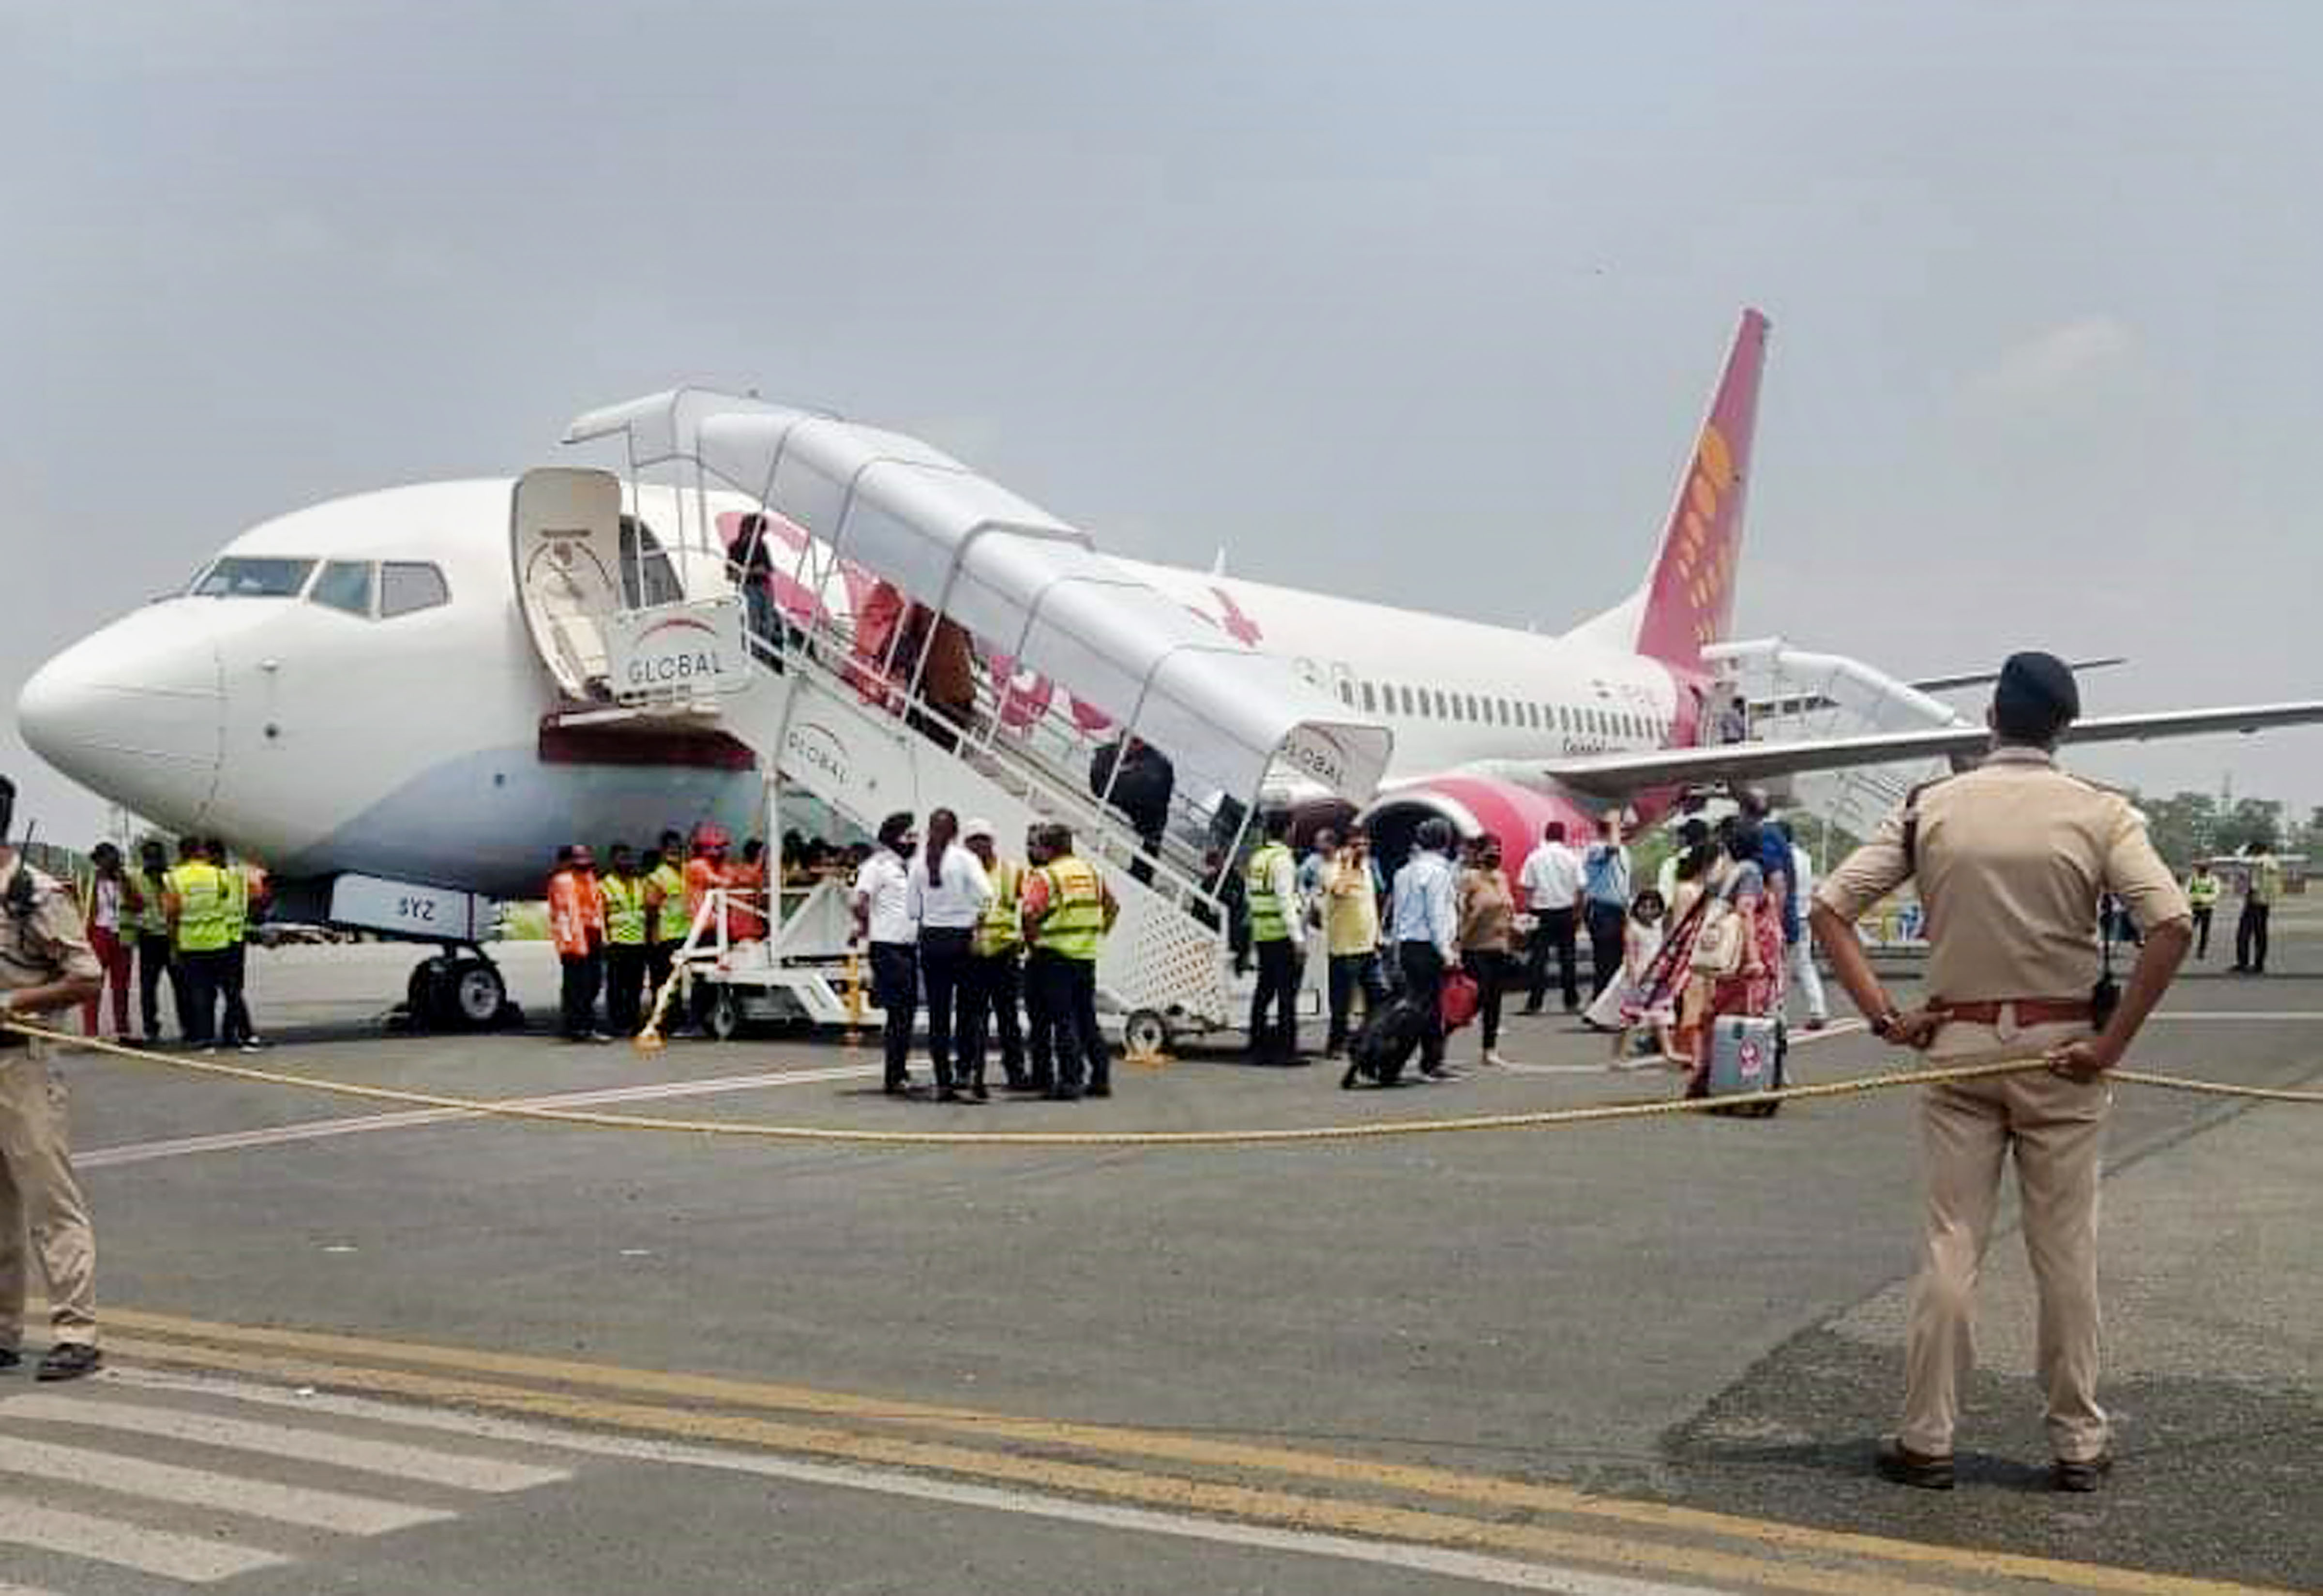 Delhi-bound SpiceJet flight catches fire soon after taking off from Patna airport